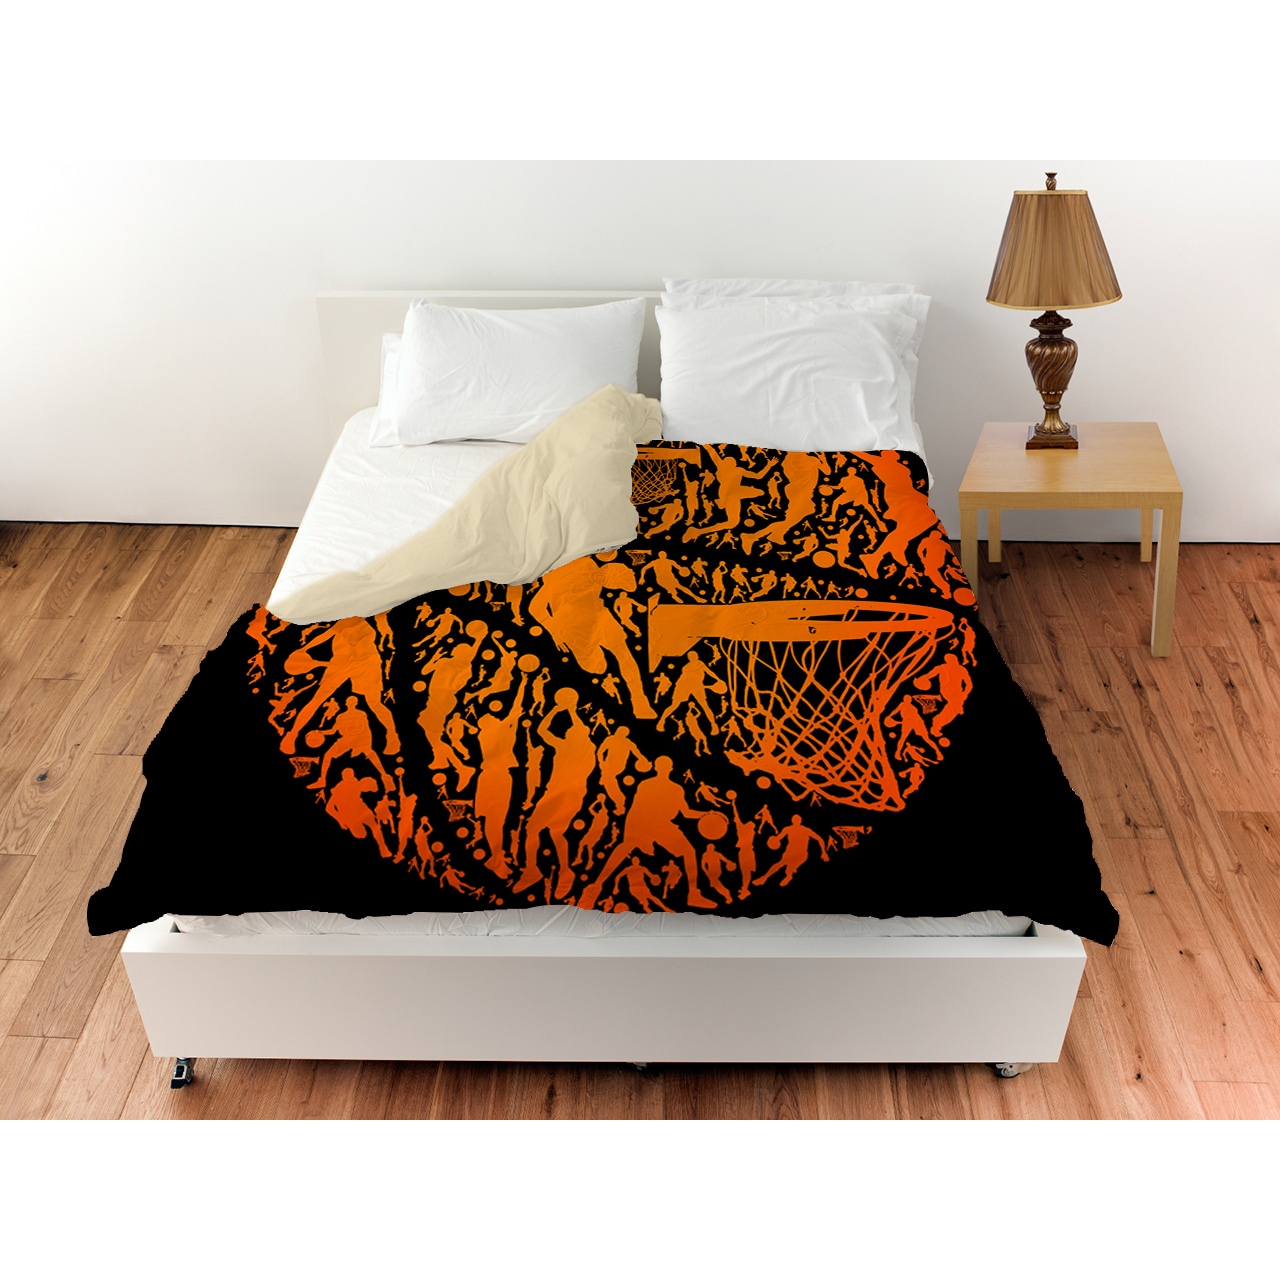 Shop Basketball Sports Silhouettes Duvet Cover On Sale